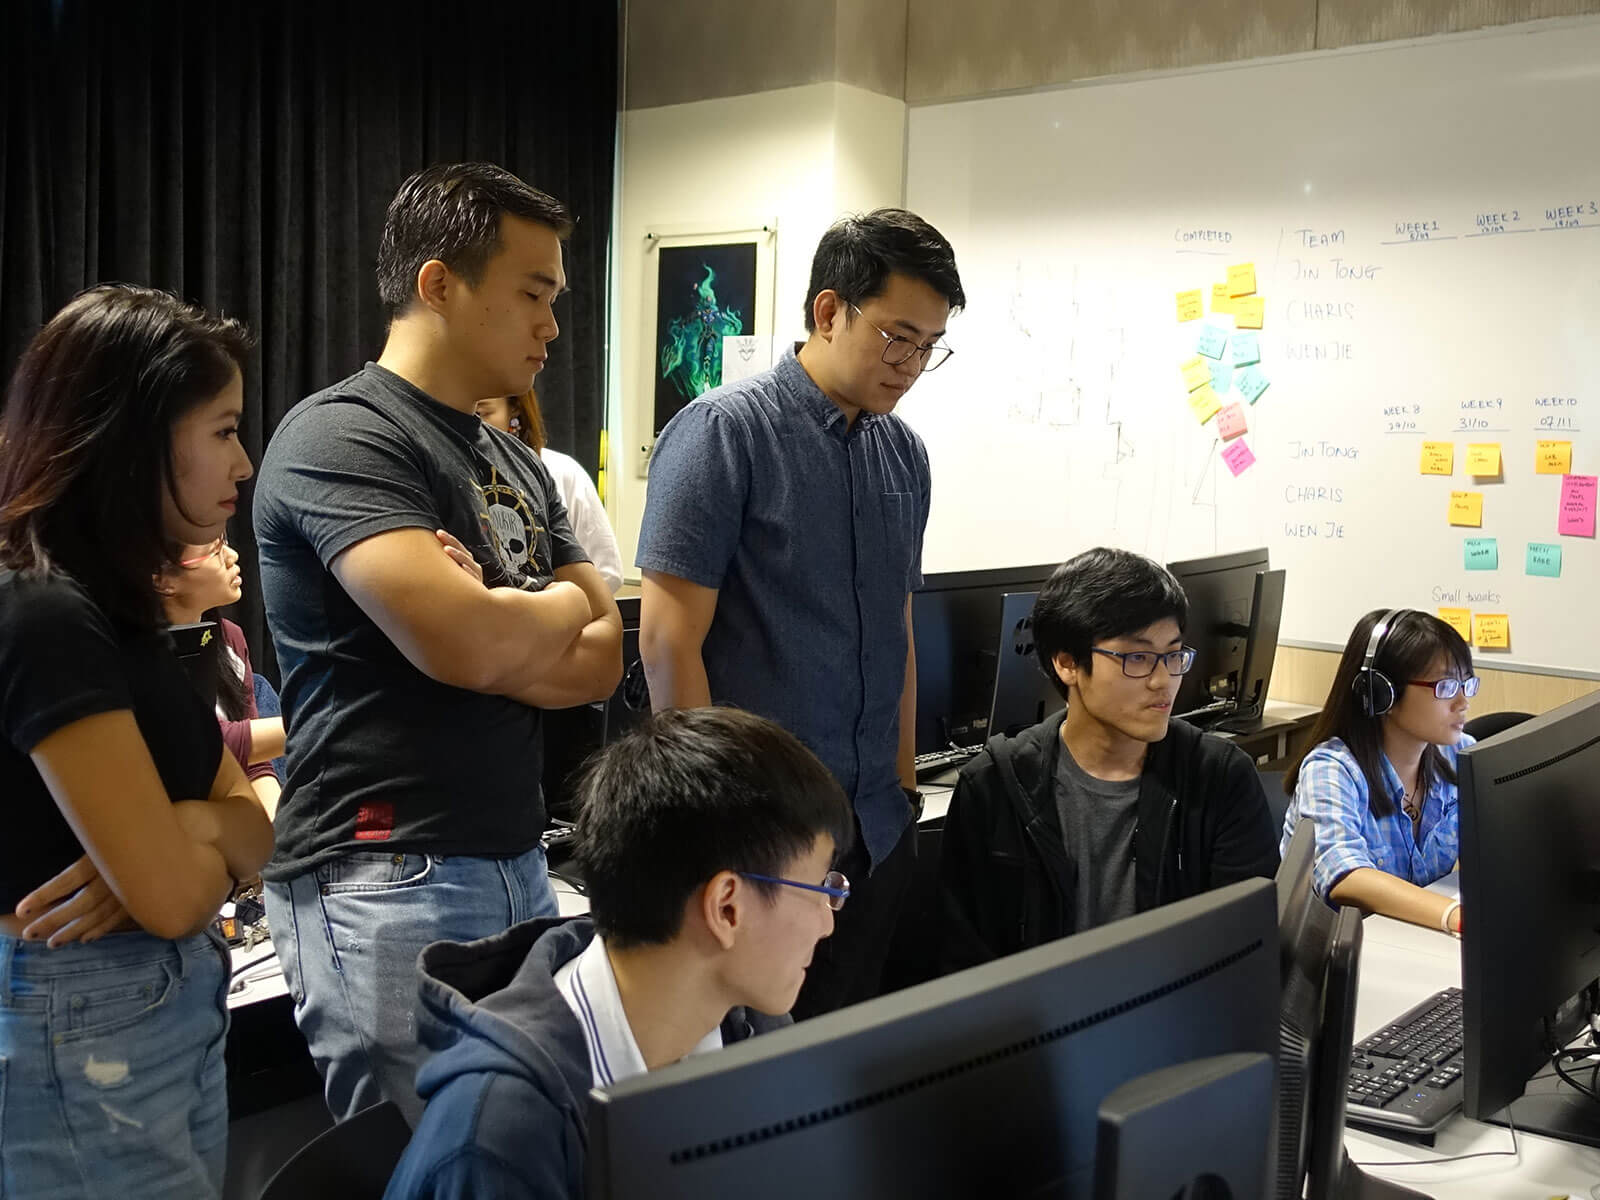 Kobe Sek from Ubisoft Singapore and others look down at a student’s monitor in a computer lab classroom, with students seated at two rows of workstations.